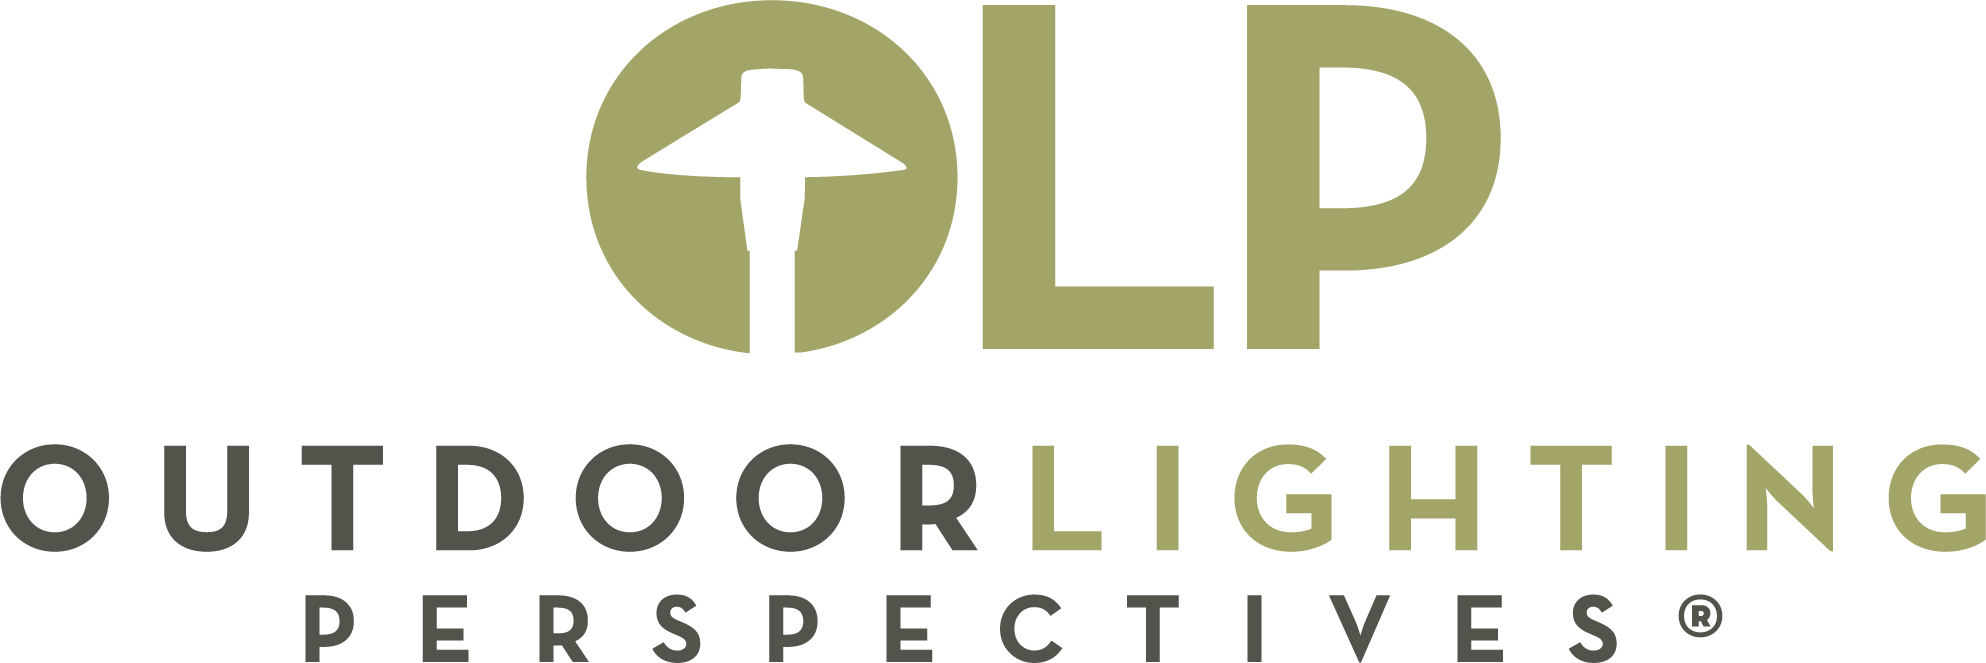 Outdoor Lighting Perspectives of West Houston and the Woodlands Logo